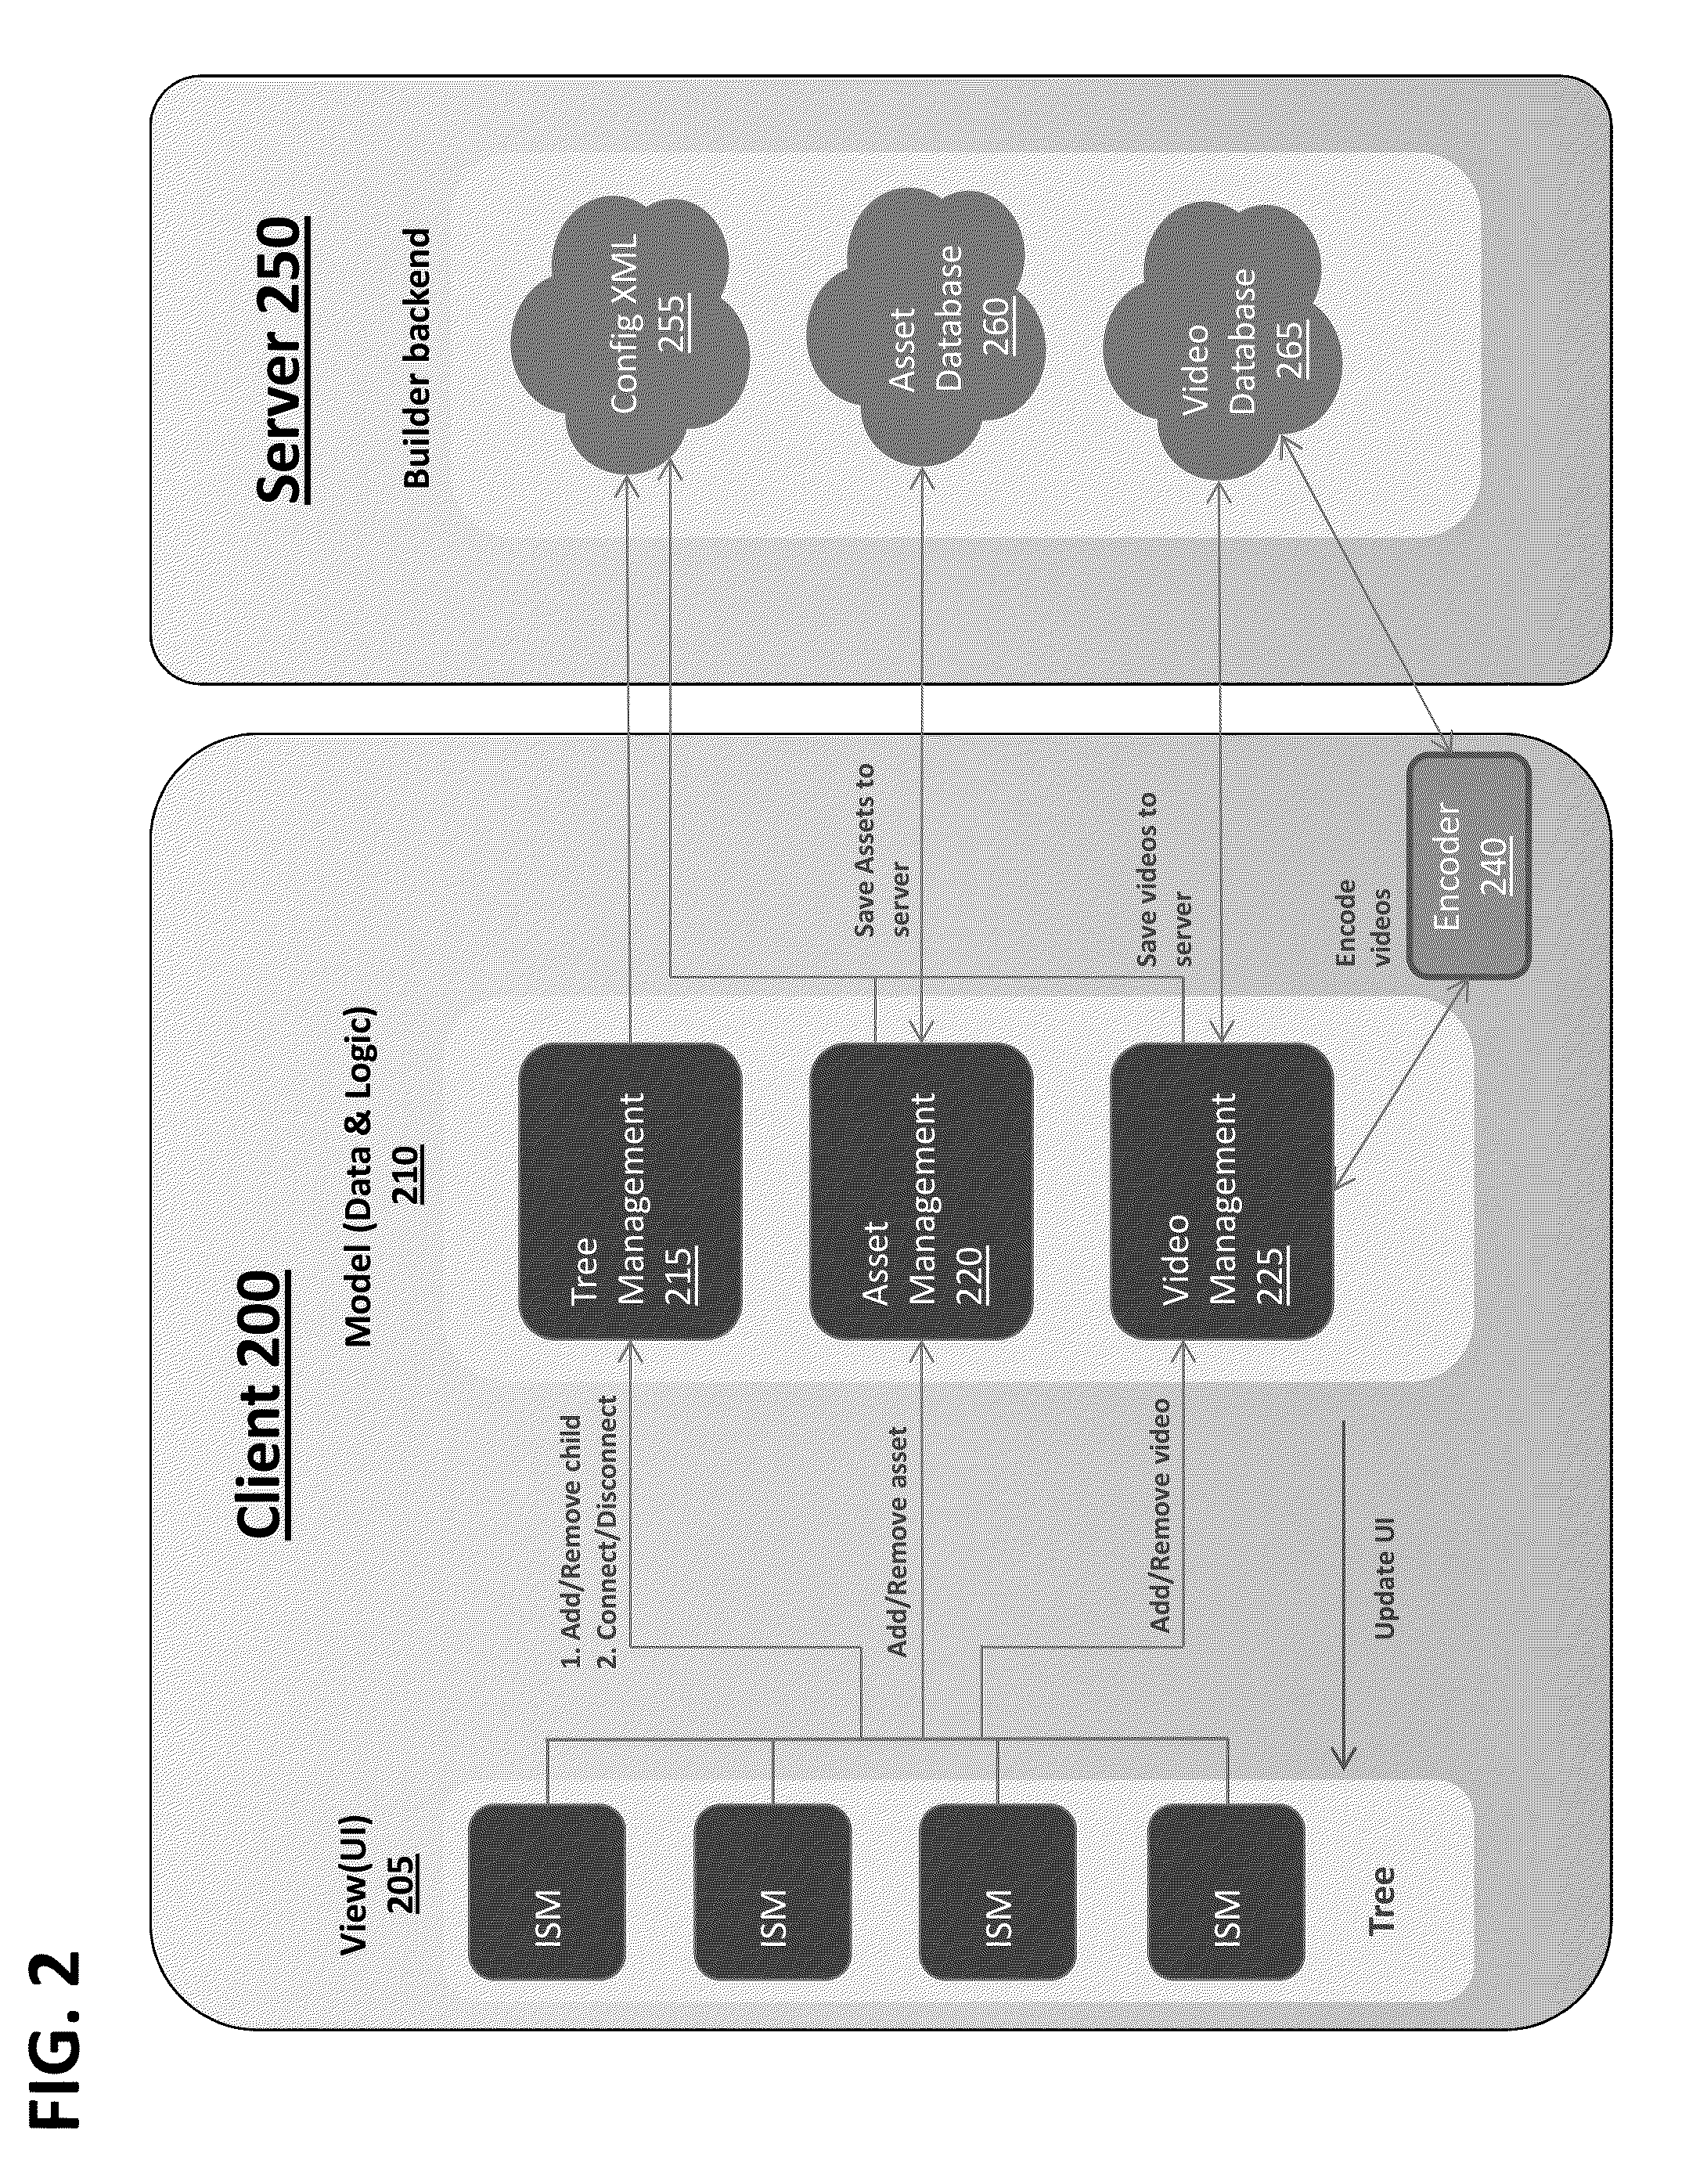 Systems and methods for constructing multimedia content modules